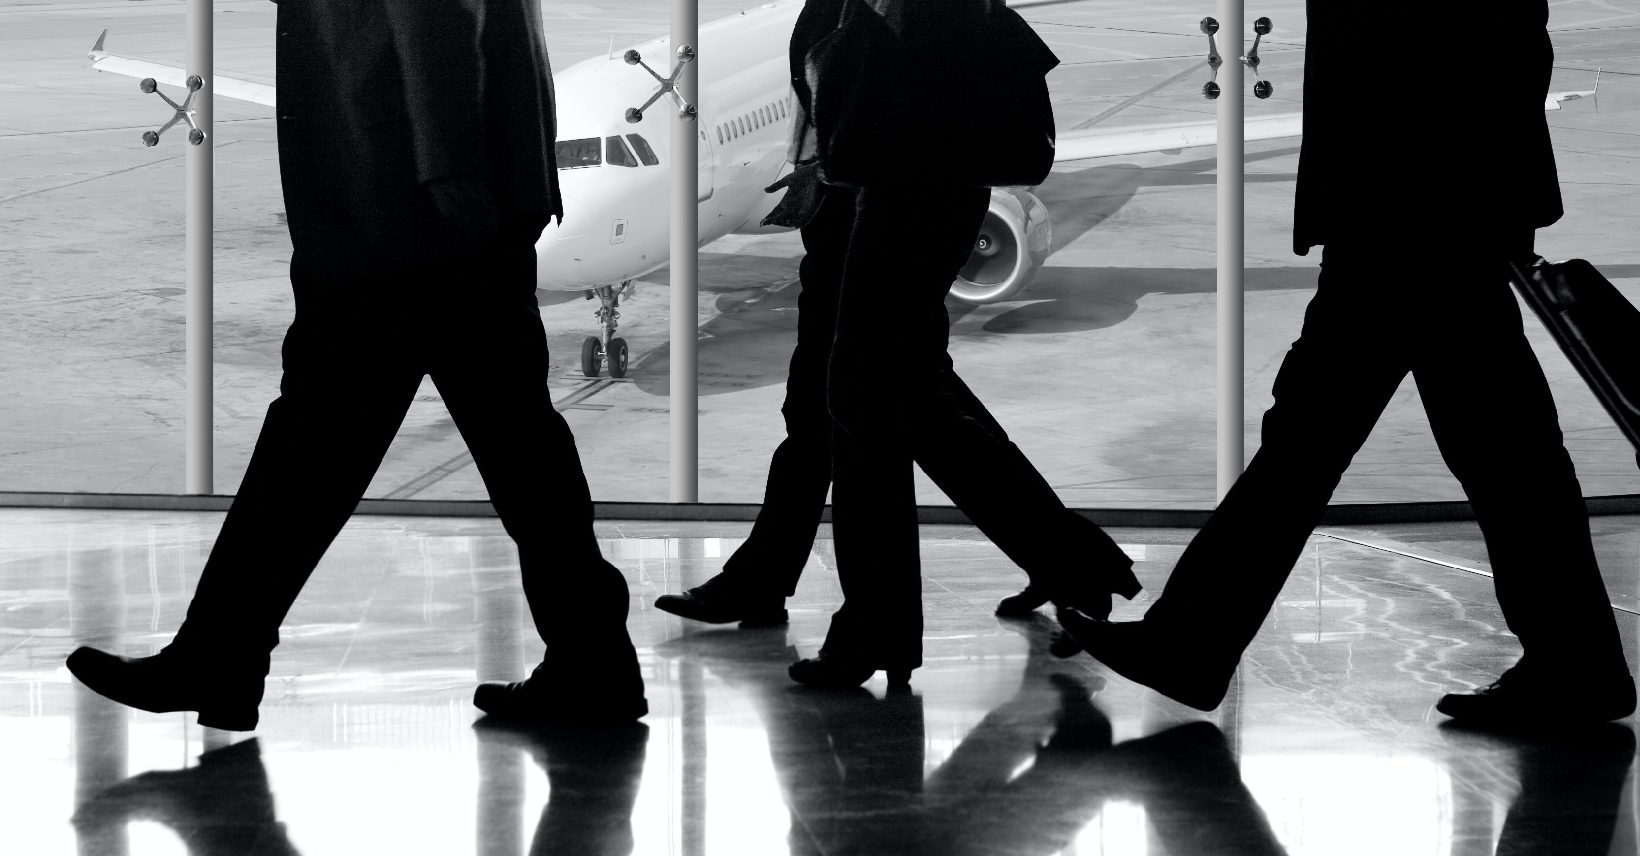 Businessmen and women arriving at the airport, ready to rent a SANI Car Rental and get to their meeting